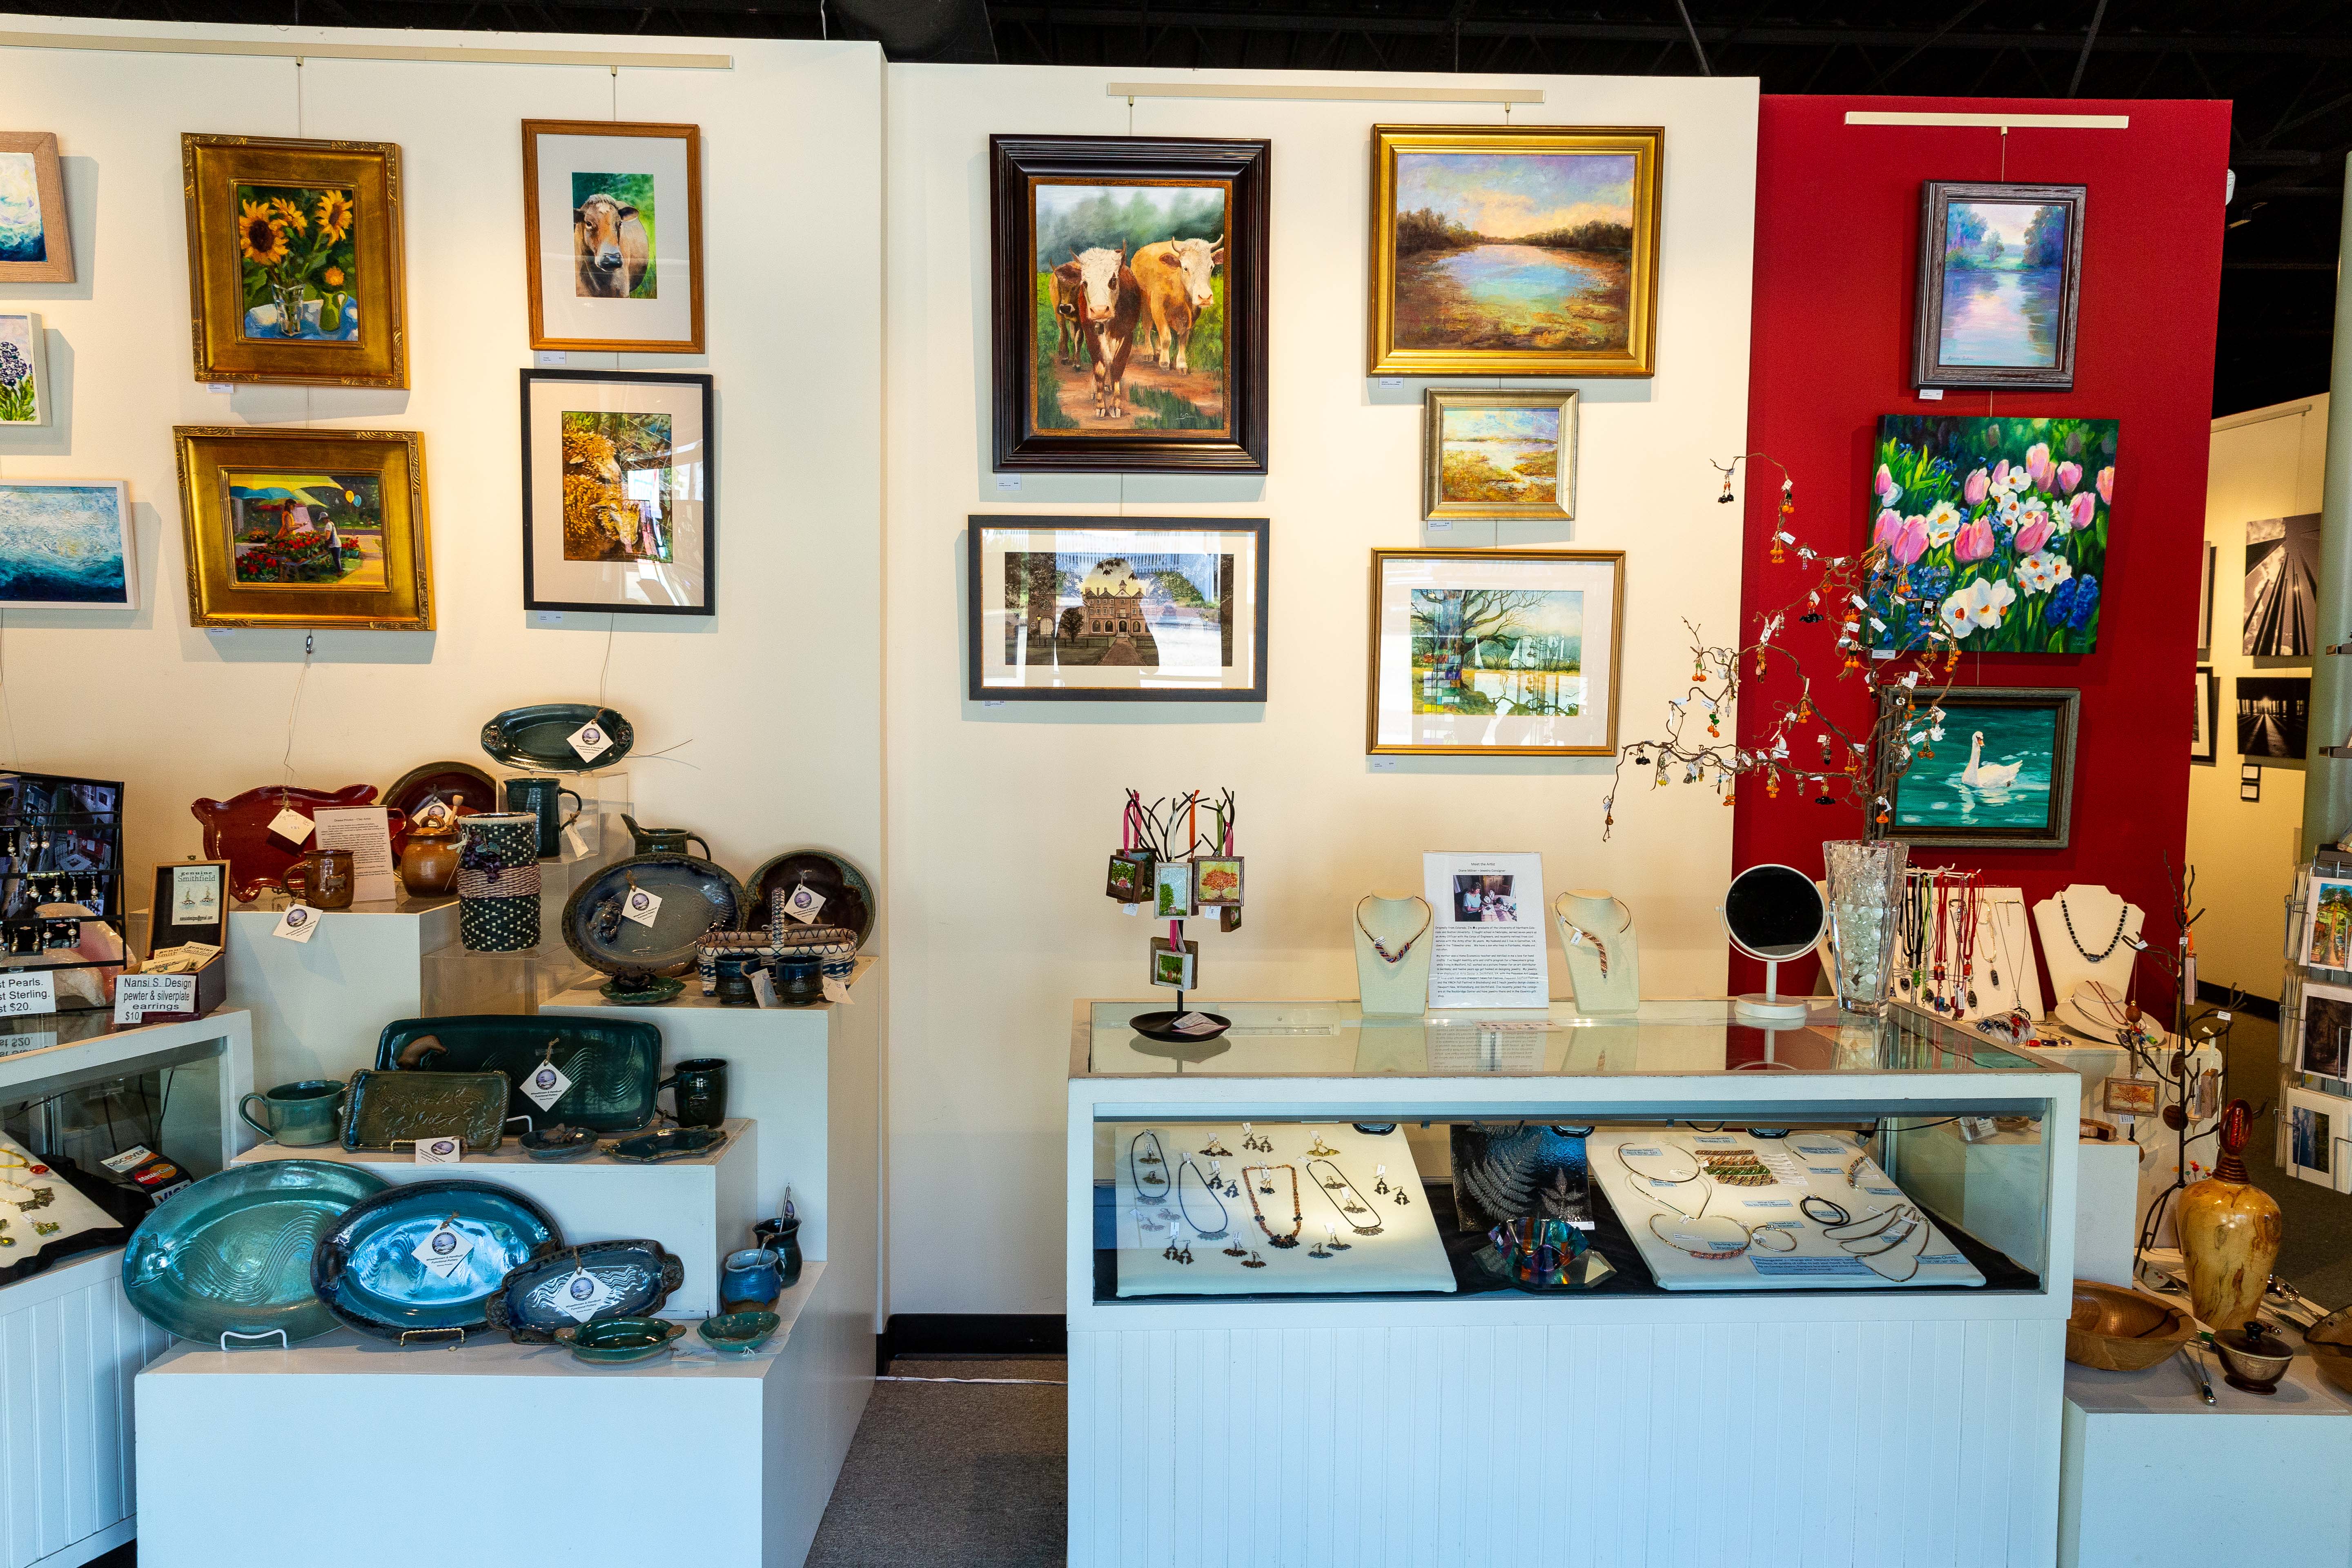 Annual Isle of Wight Arts League Members Show and Sale